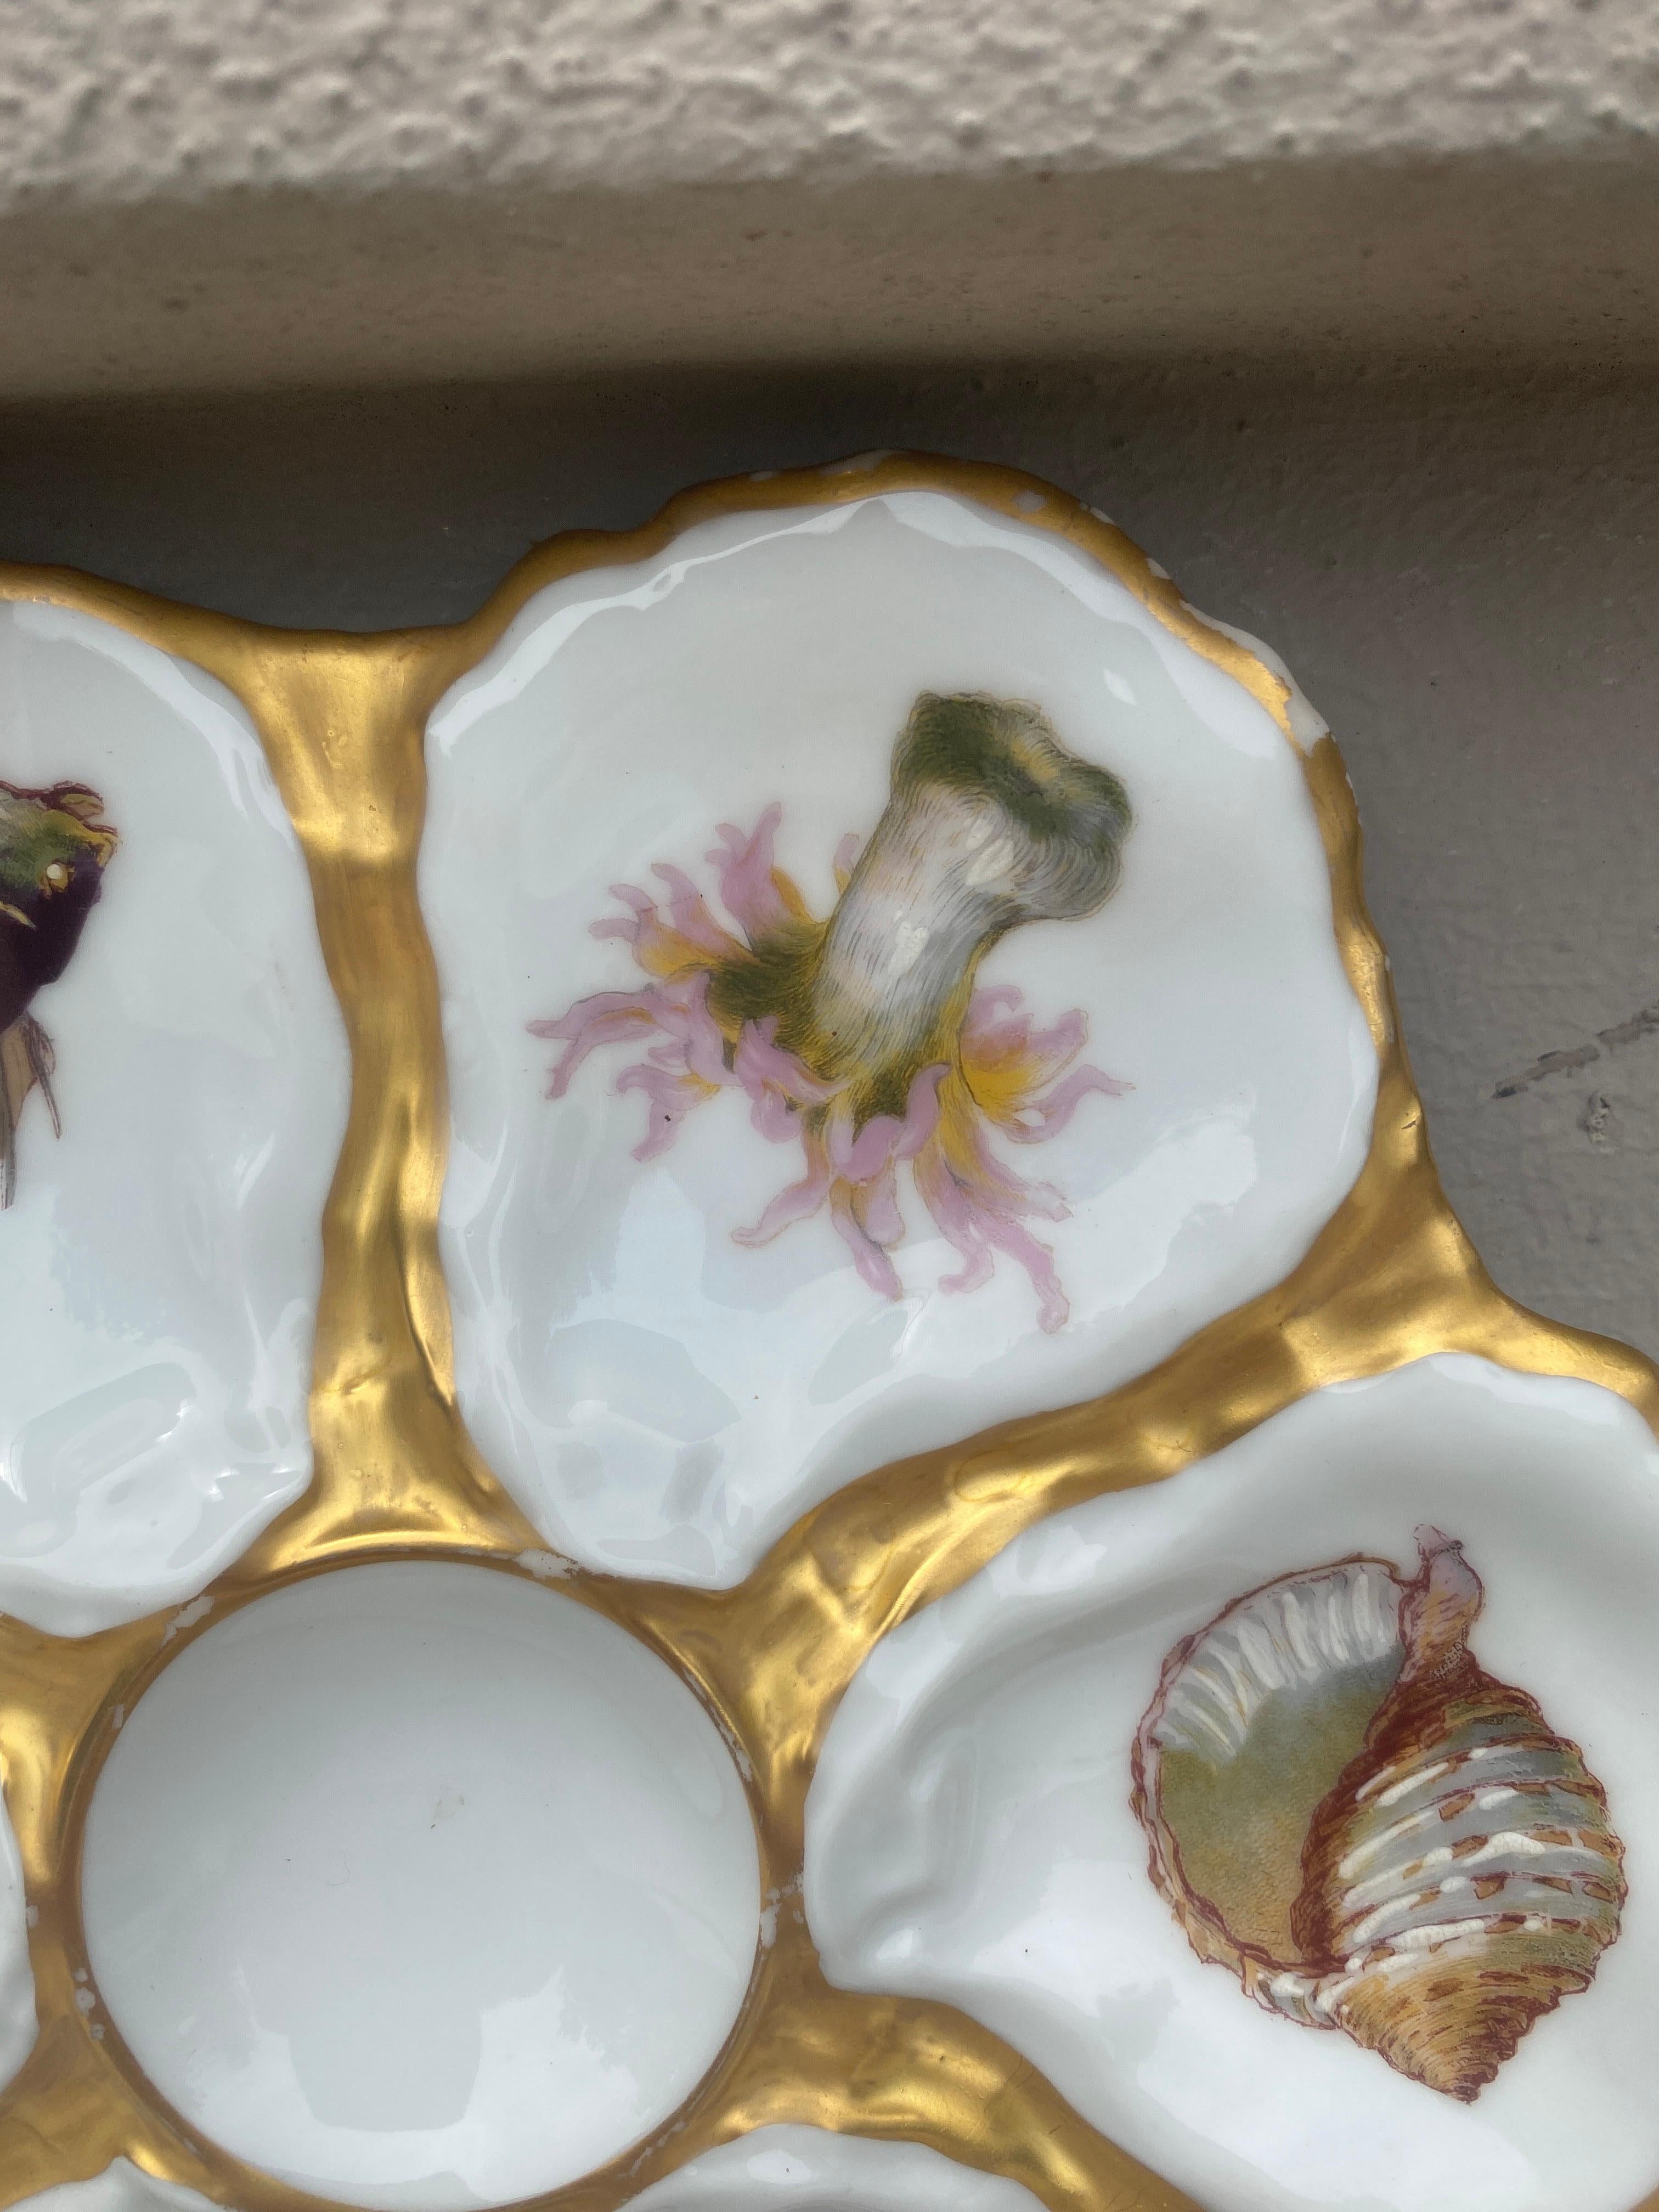 Antique 19th-century French porcelain oyster plate with sealife pattern (shells, seaweeds, fish) signed Limoges Haviland & C.